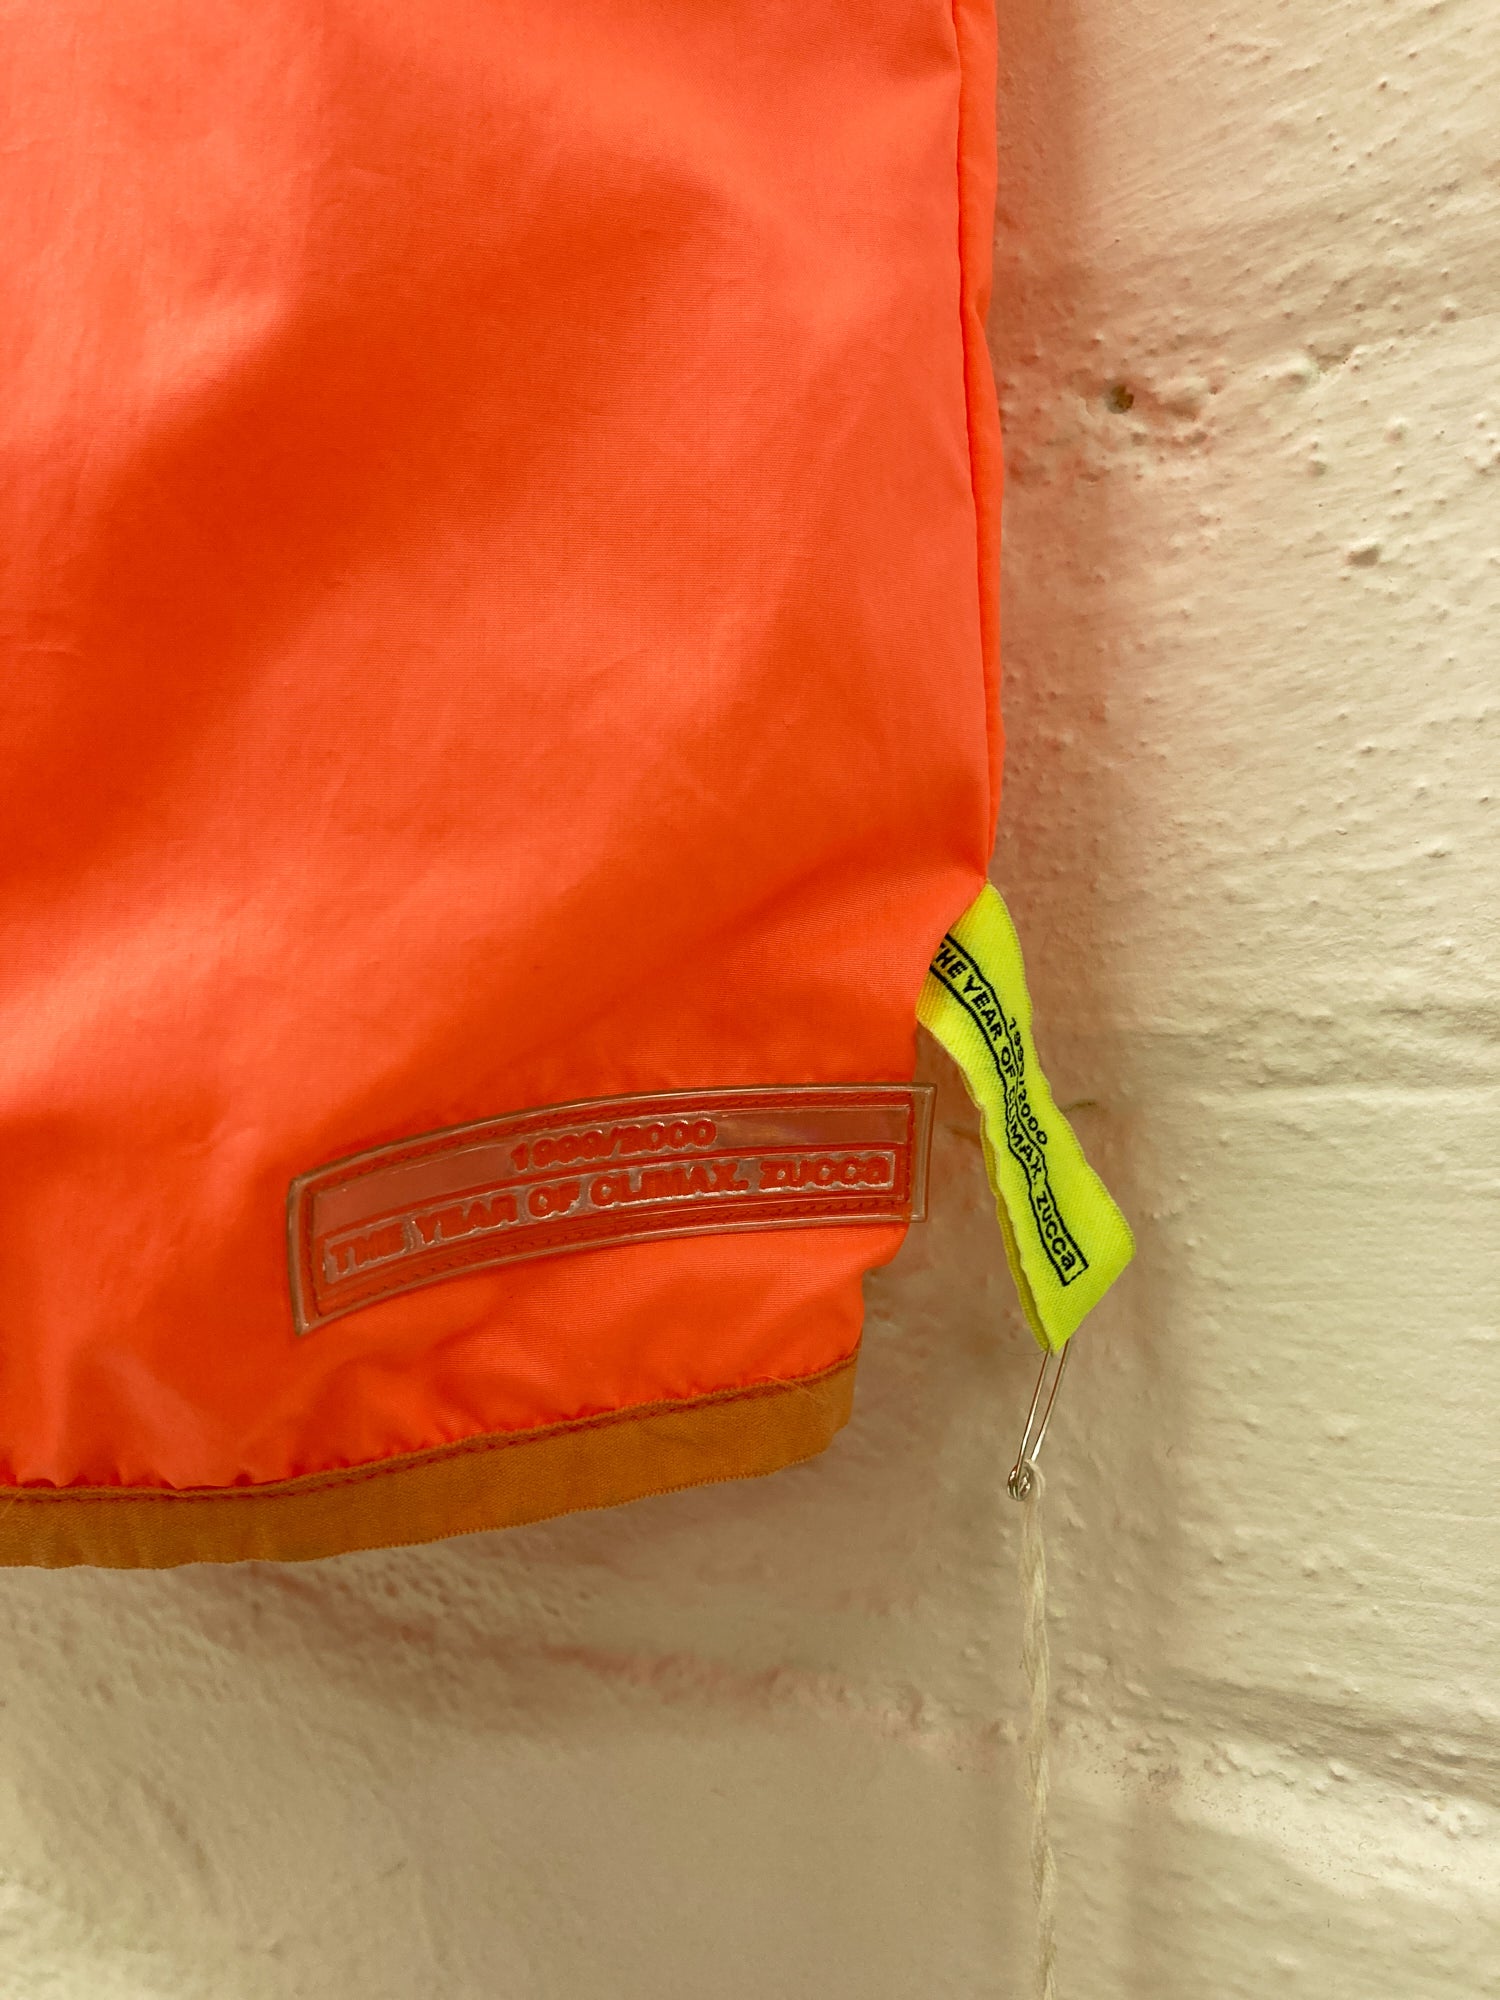 Zucca AW1999-2000 'the year of climax' fluorescent orange zip coat - size M S